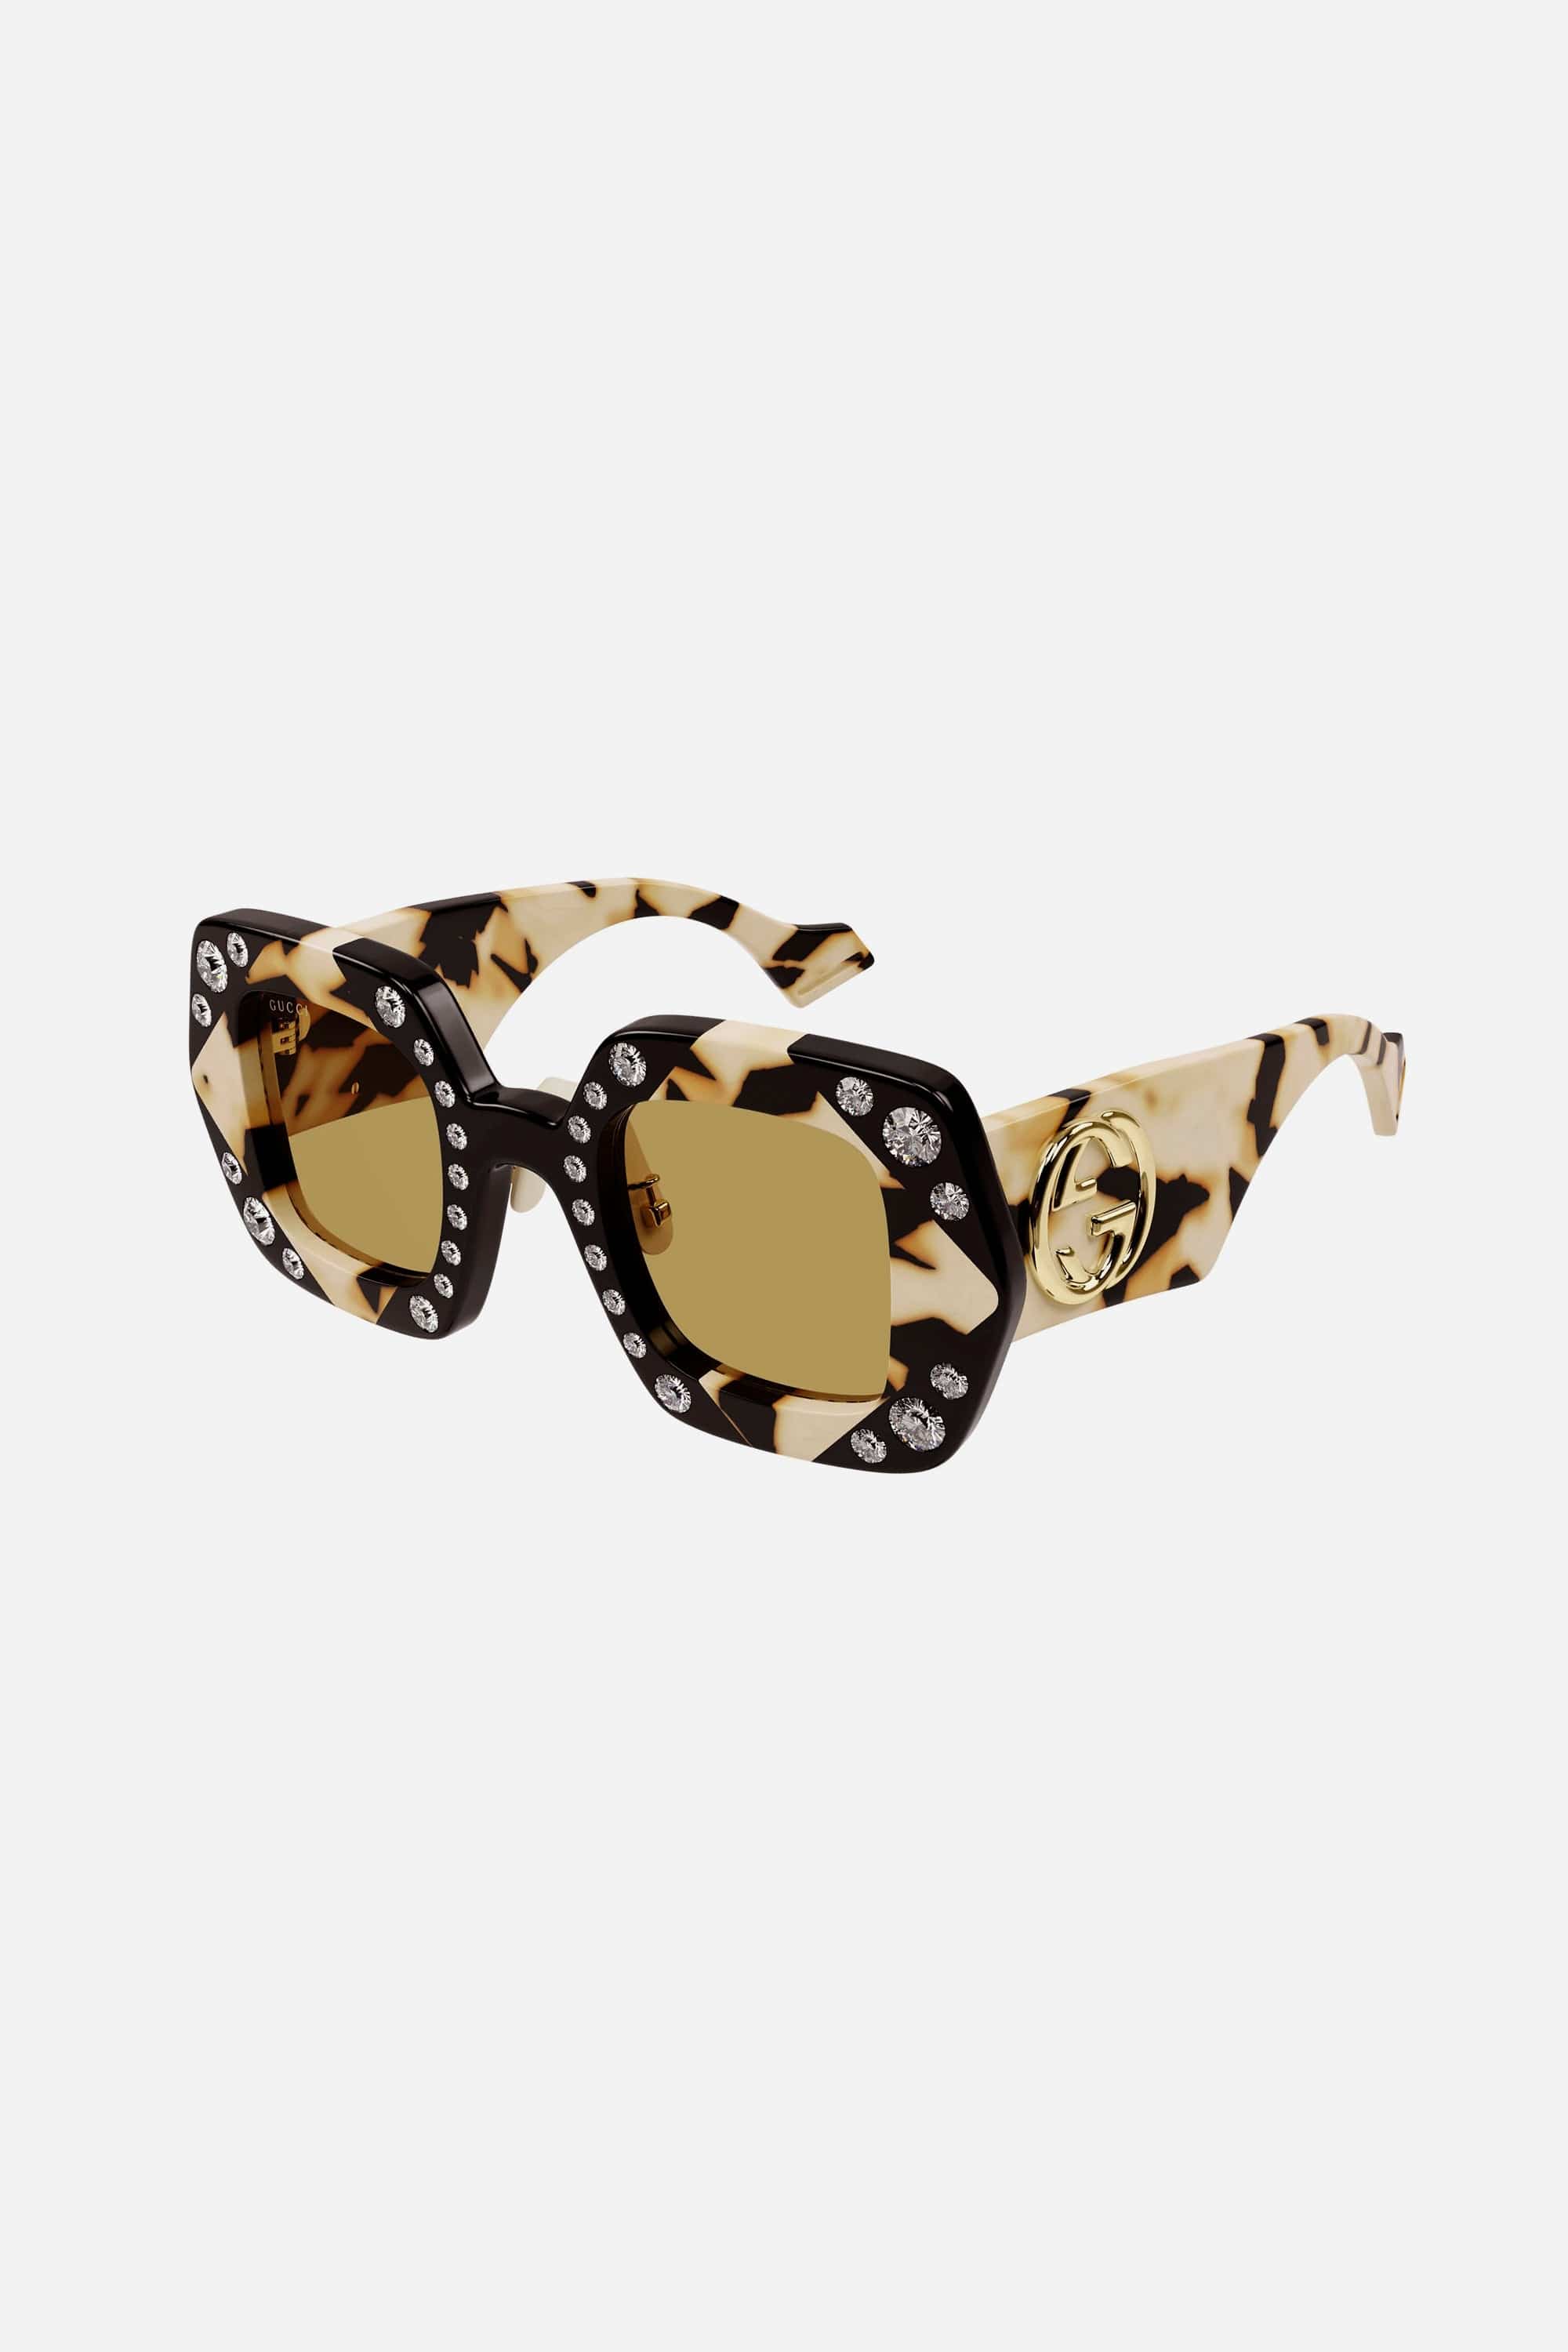 Gucci Hollywood collection sunglasses in yellow featuring Swarovski stones - Eyewear Club